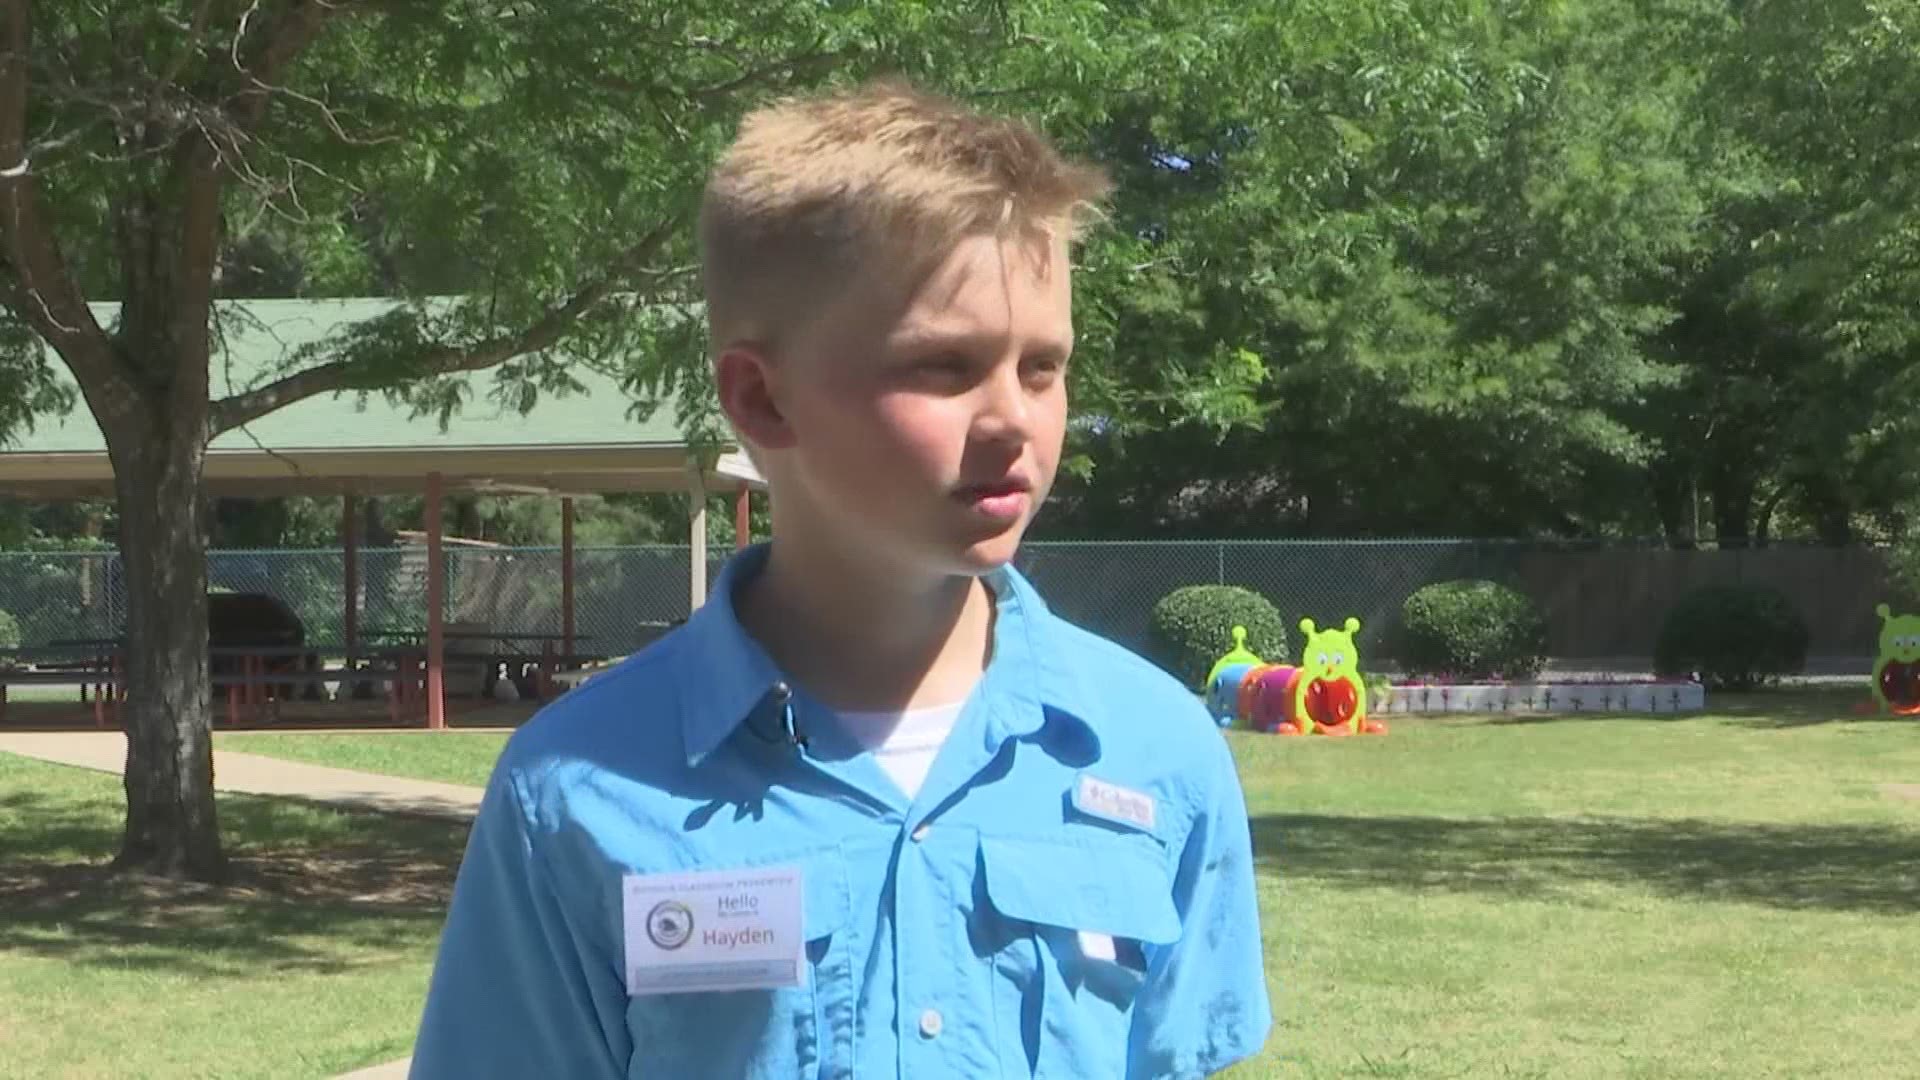 Fifth grader Hayden Smith shares why he likes the Outdoor Classroom at Rainbow Elementary School and why he's excited about the school's time capsule.